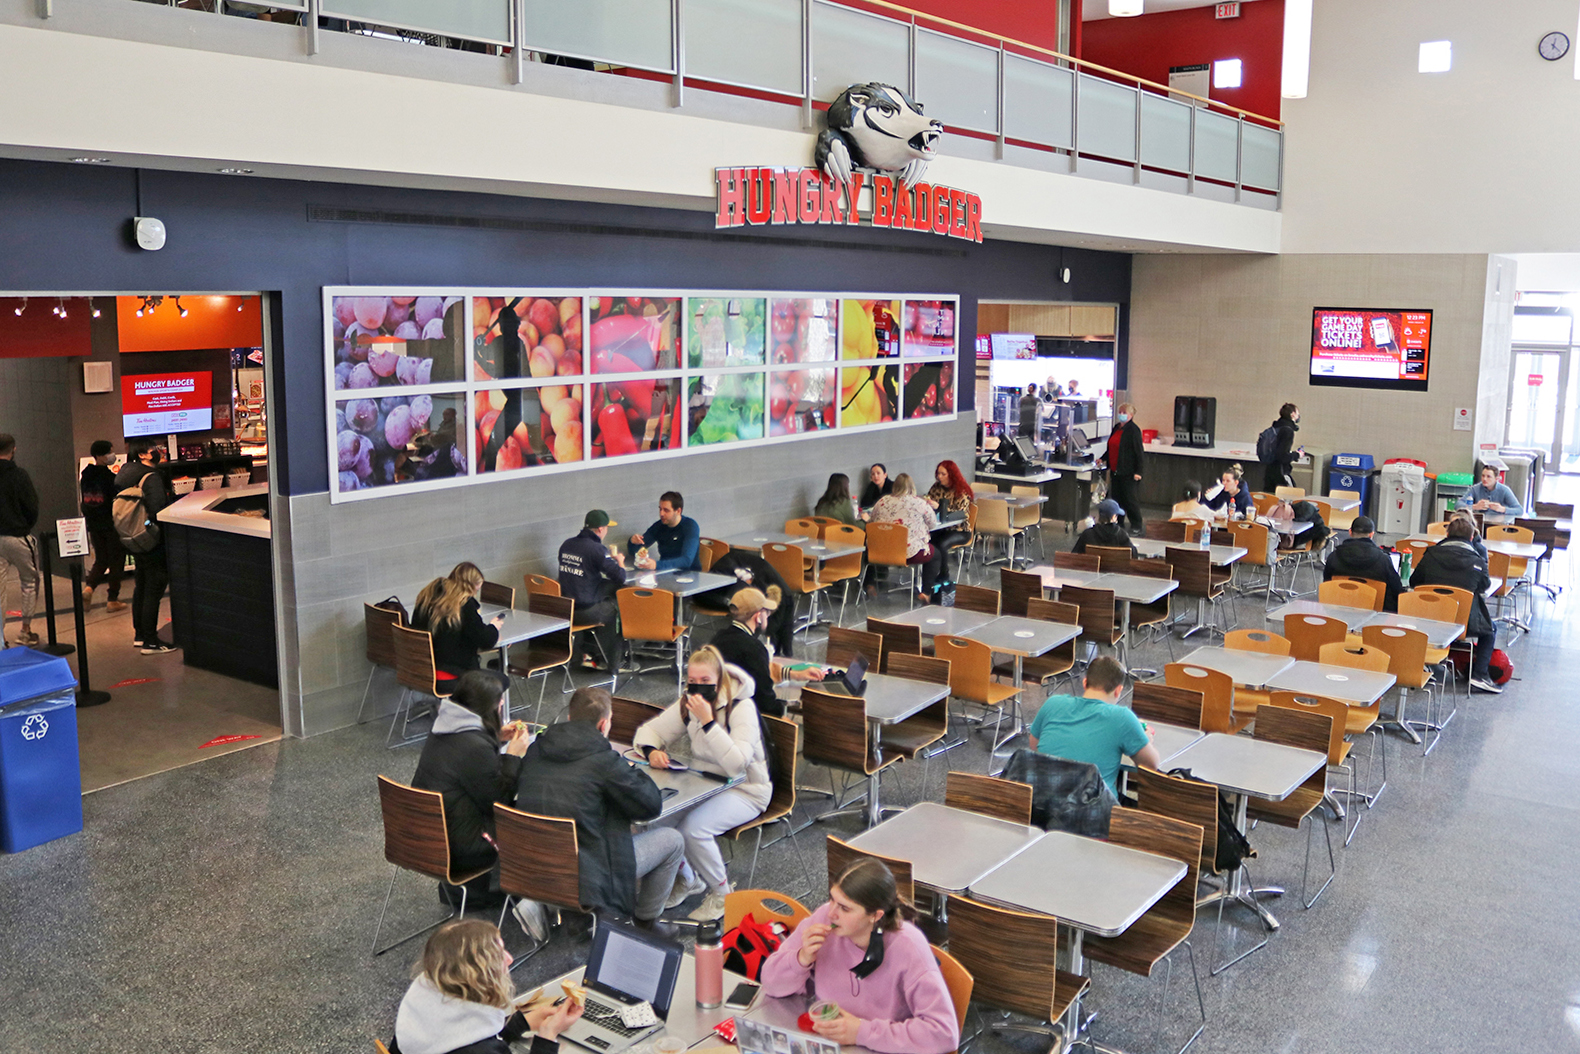 Several people sit at tables and chairs while eating lunch and working on laptops. A wall behind them features several large photos of colourful fruits and vegetables. Above the photos is a sign with the words “Hungry Badger” in capital letters and a cartoon 3D image of a badger.